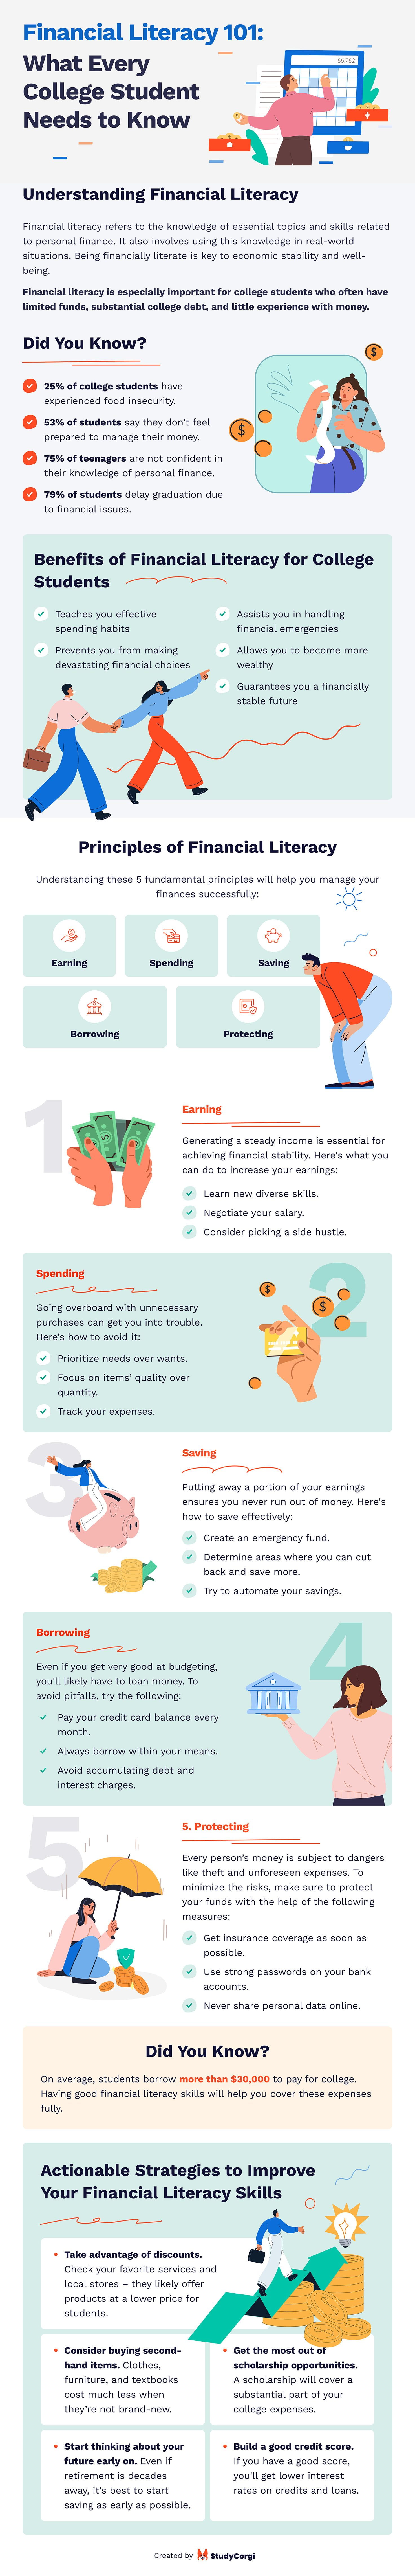 This infographic sheds light on college money issues, providing actionable strategies to boost your financial literacy skills.